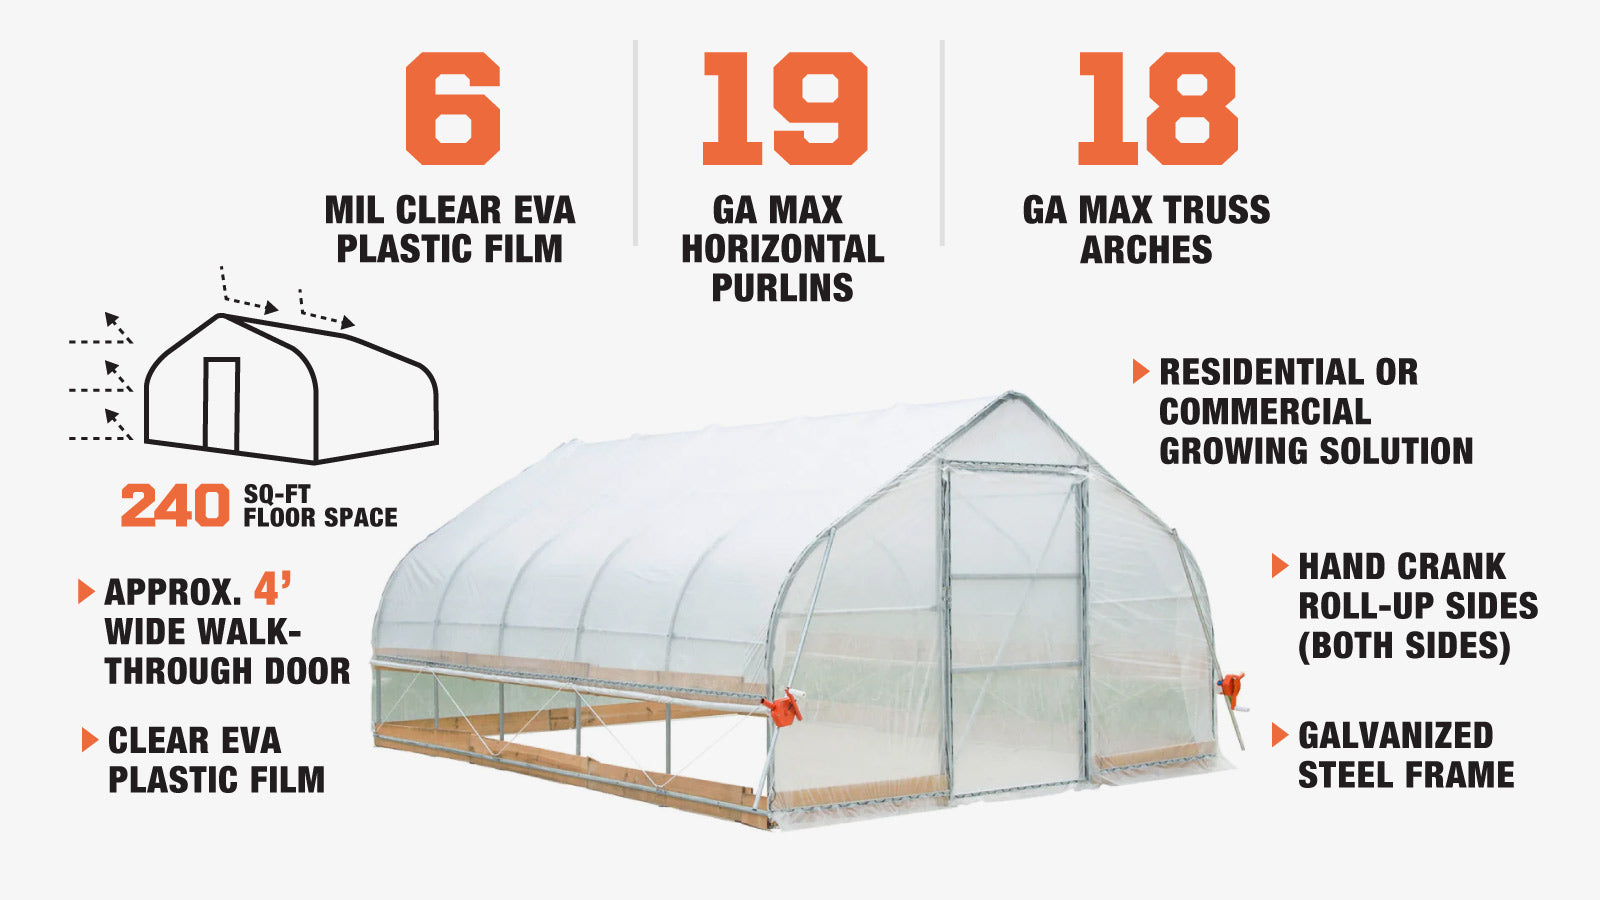 TMG Industrial 12’ x 20’ Tunnel Greenhouse Grow Tent w/6 Mil Clear EVA Plastic Film, Cold Frame, Hand Crank Roll-Up Sides, Peak Ceiling Roof, TMG-GH1220-description-image